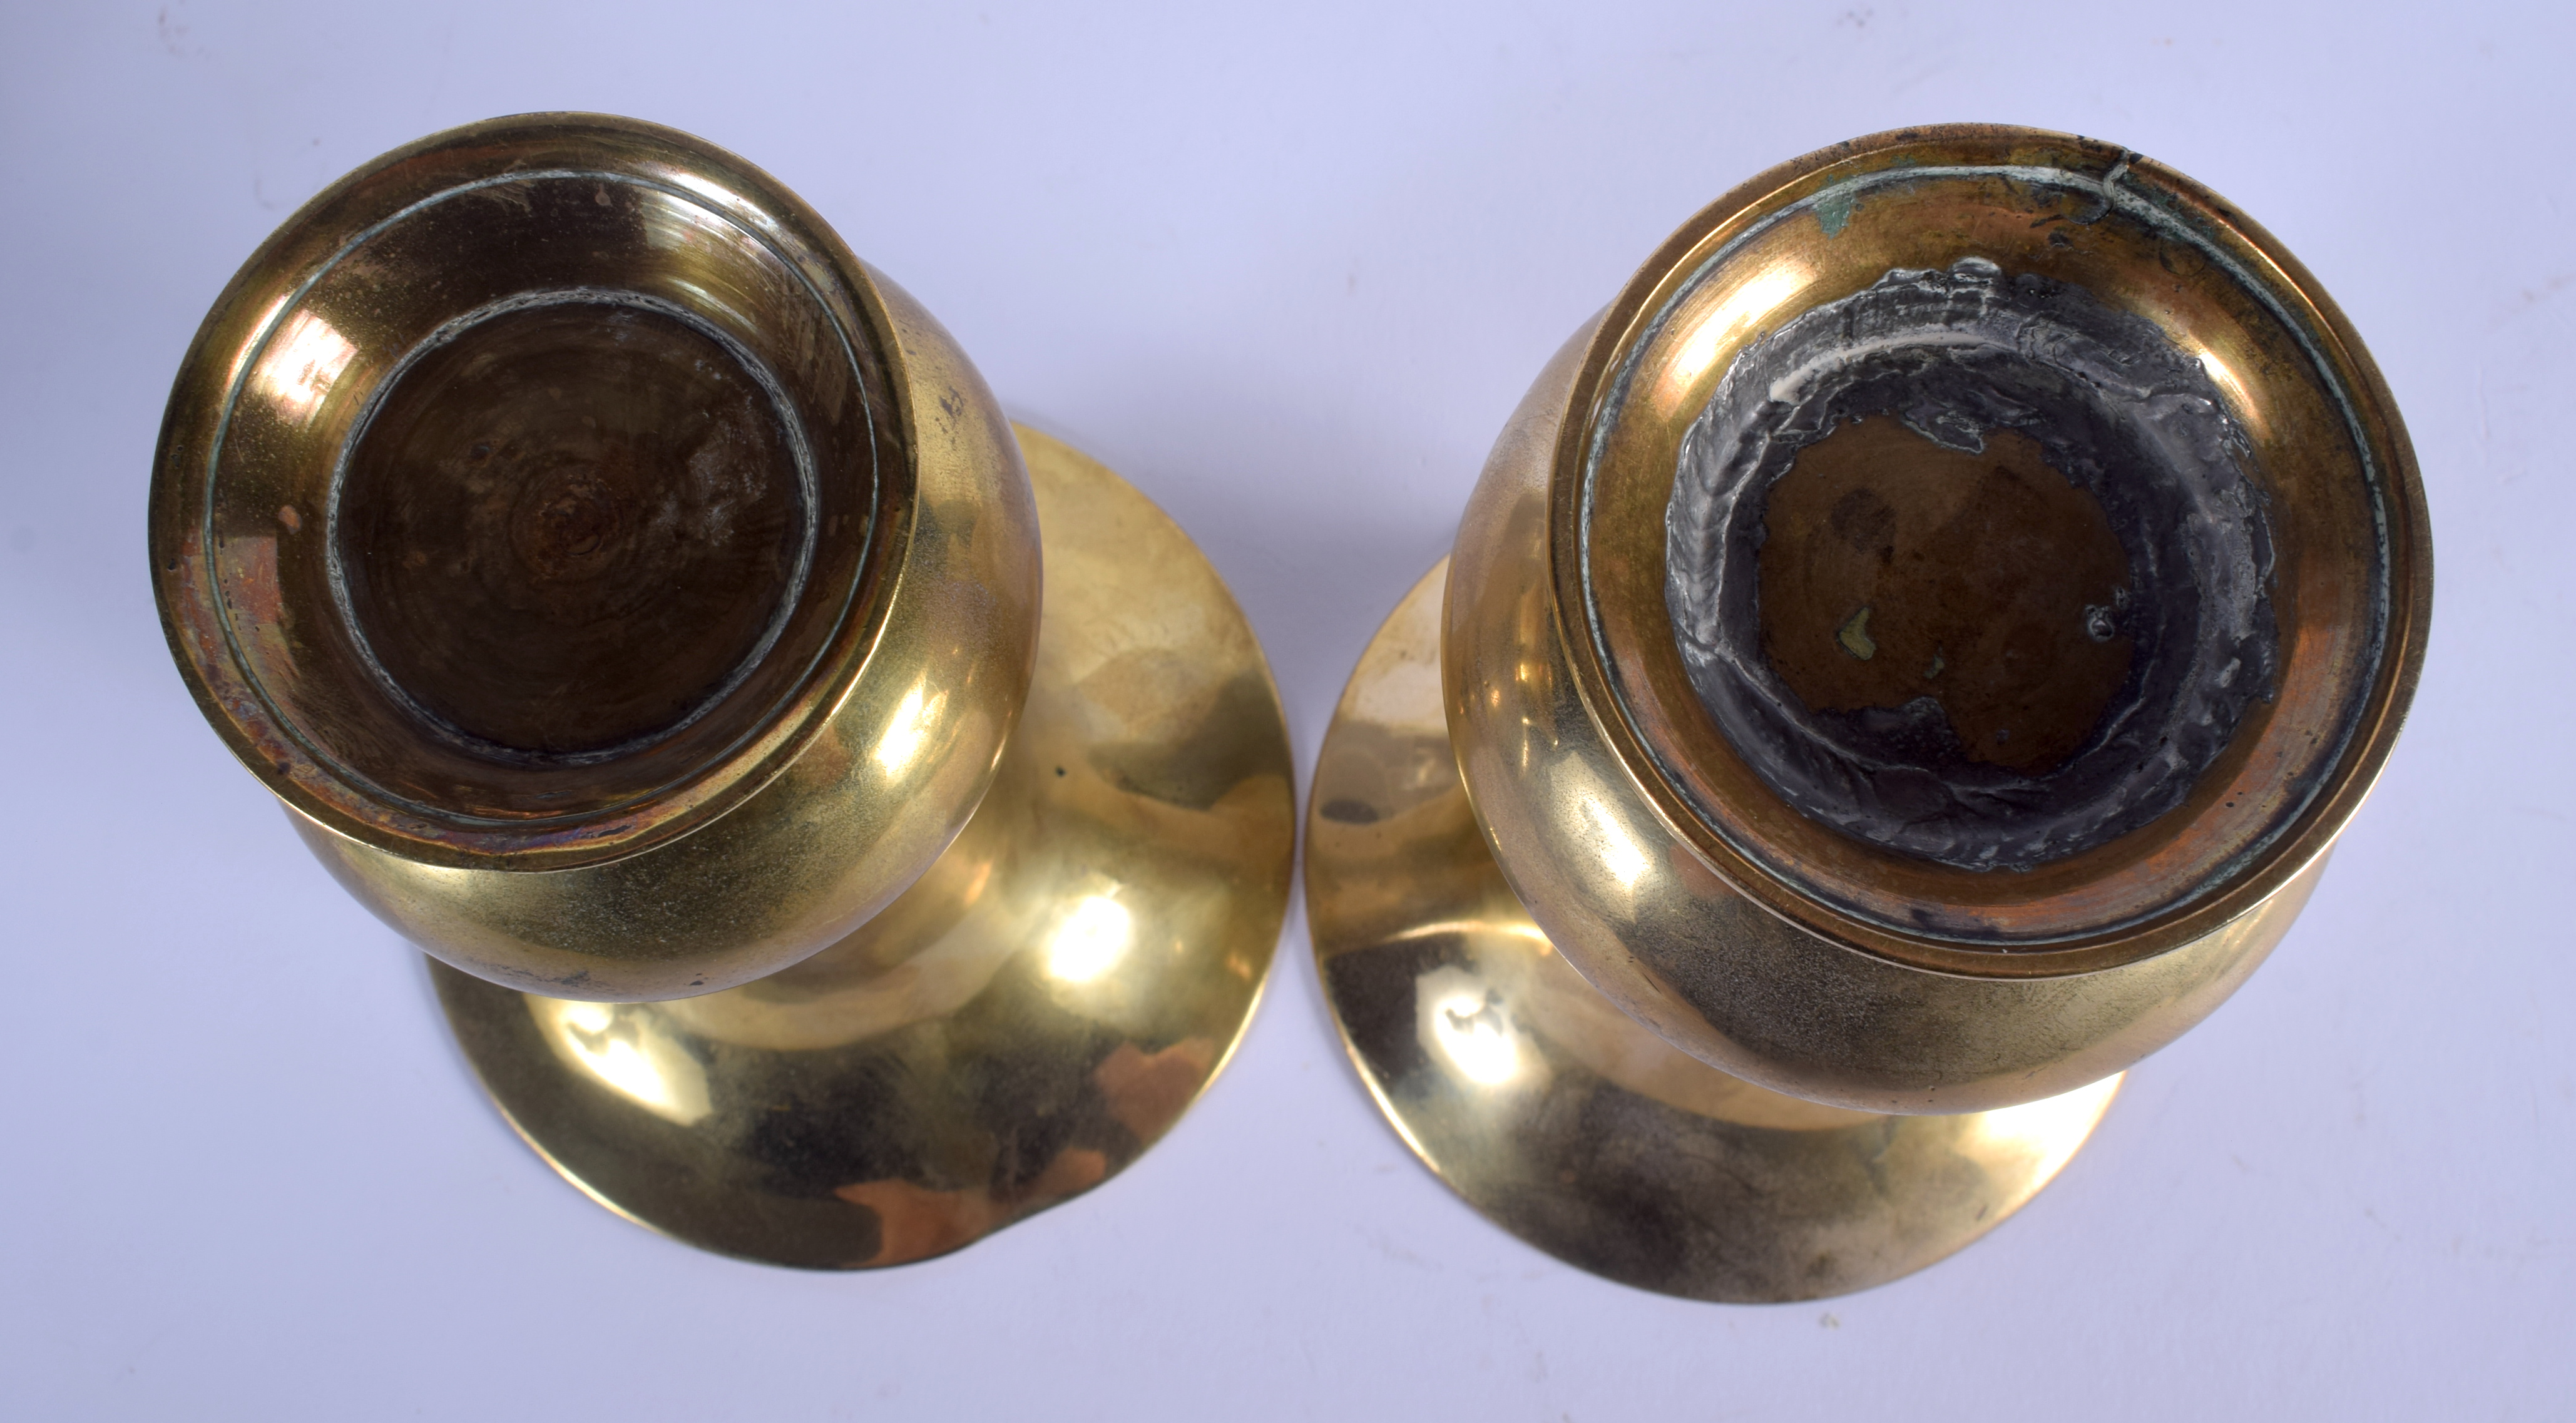 A PAIR OF 19TH CENTURY JAPANESE MEIJI PERIOD BRONZE VASES. 16 cm high. - Image 4 of 4